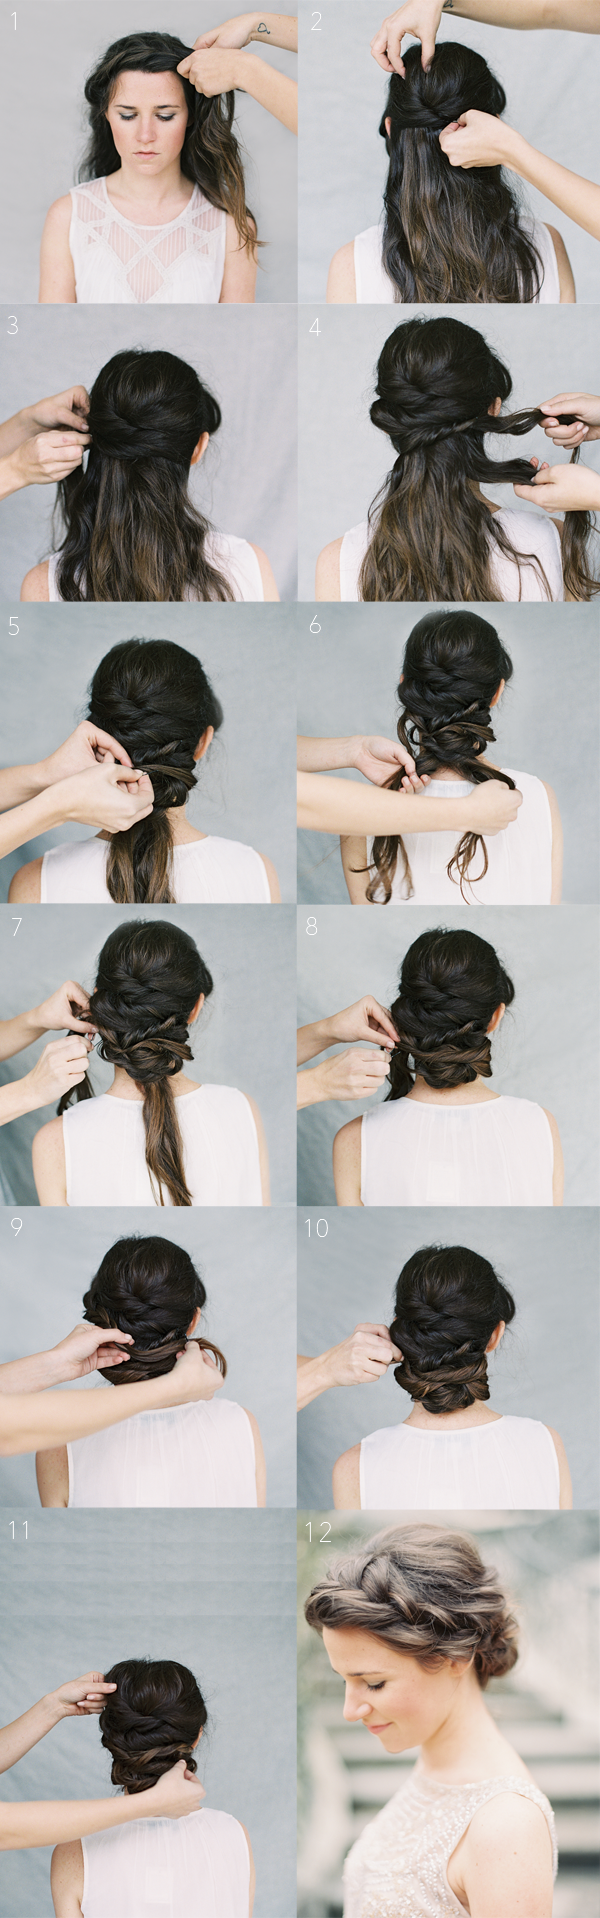 hairstyle9